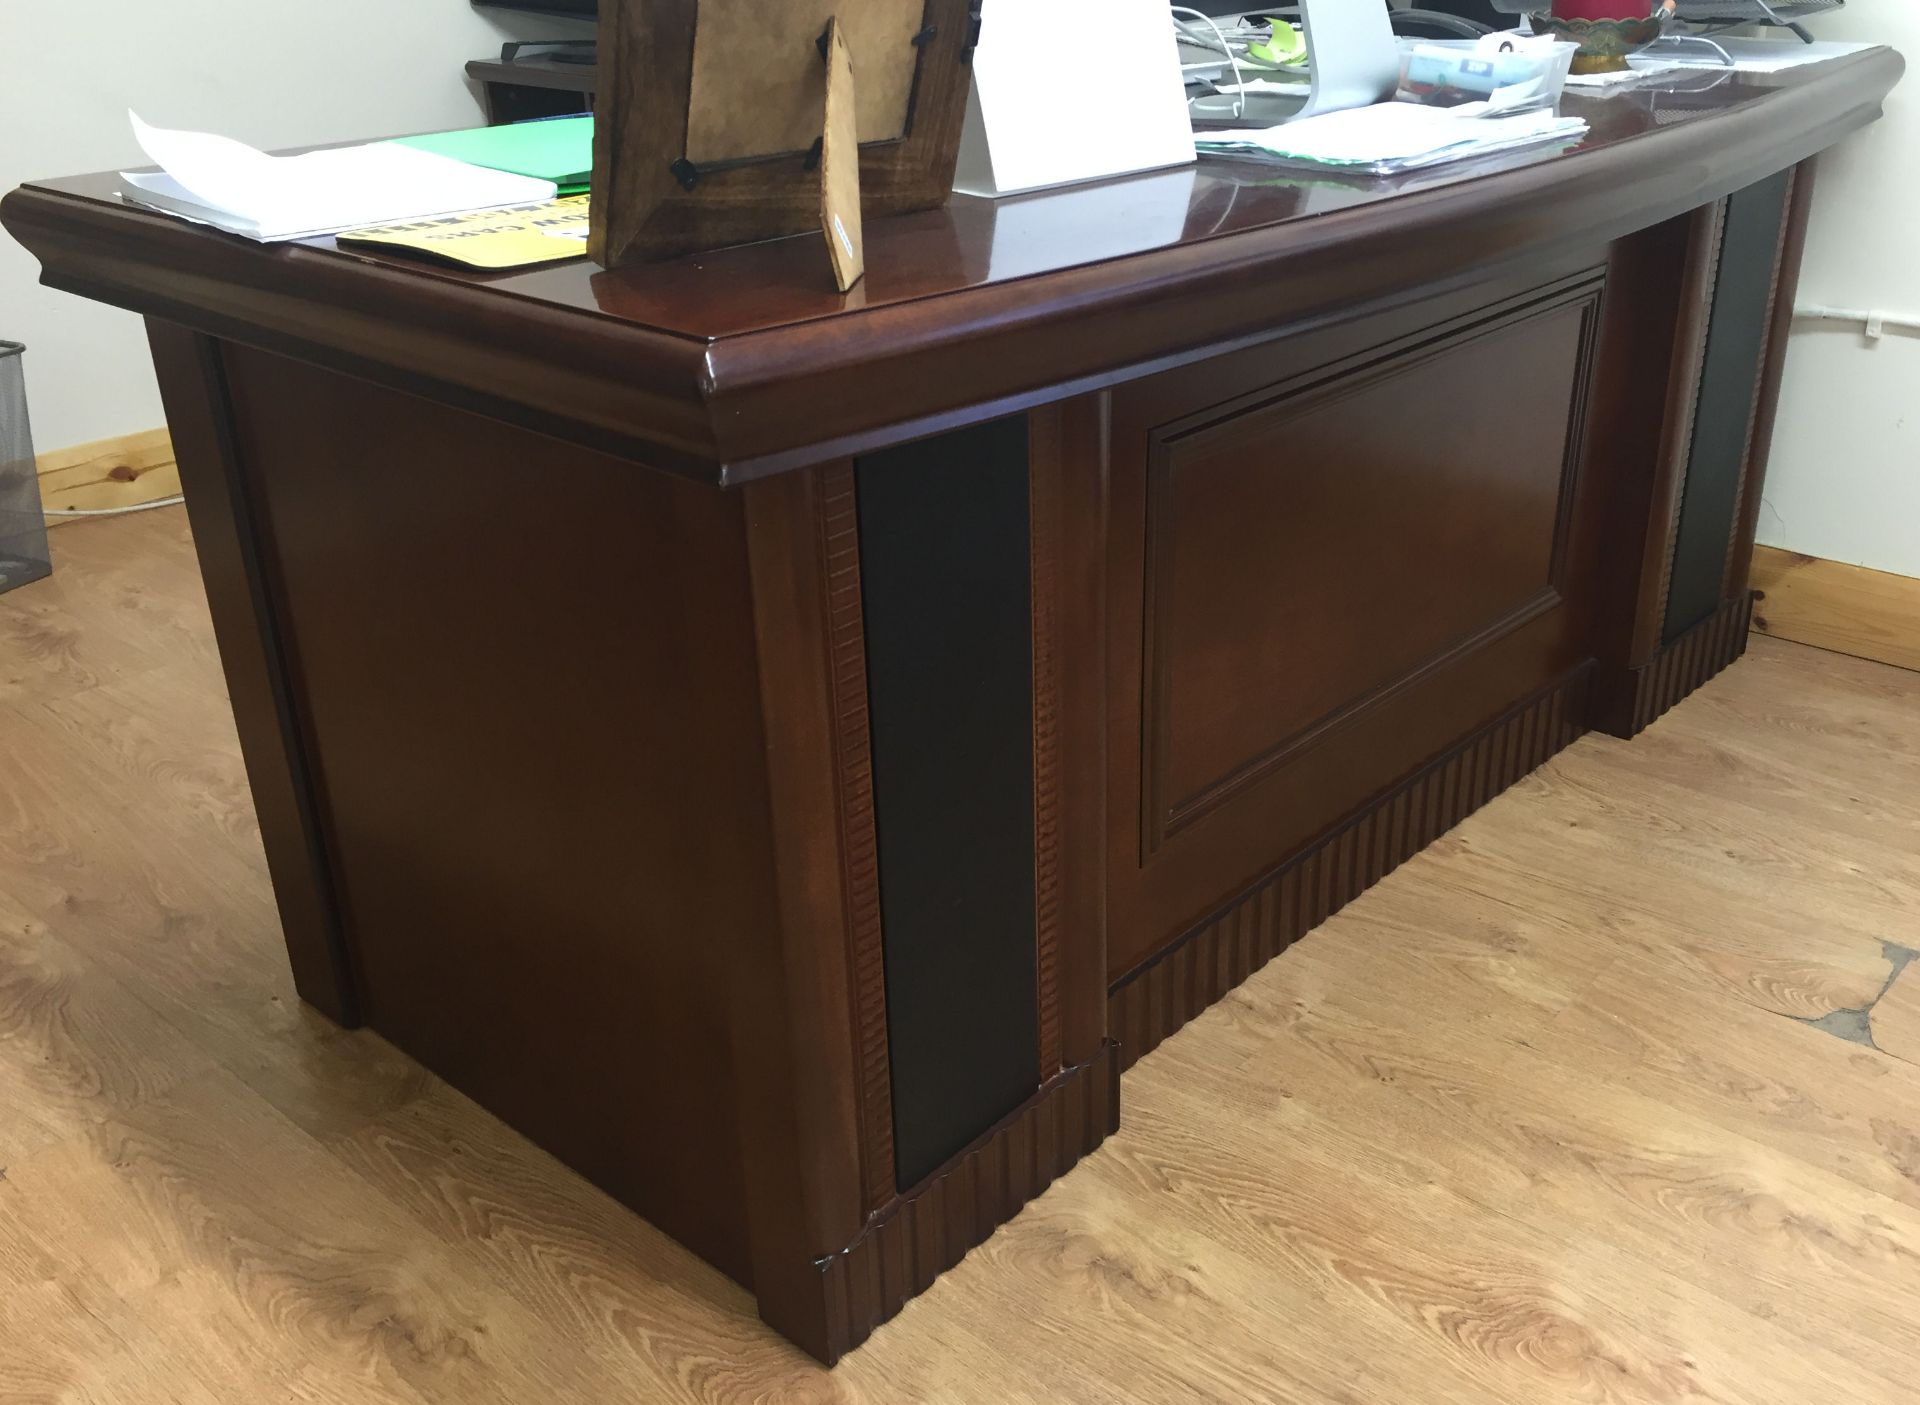 1 x Attractive Luxury Executive Office Desk, Executive Chair, Chest of Drawers and Sideboard